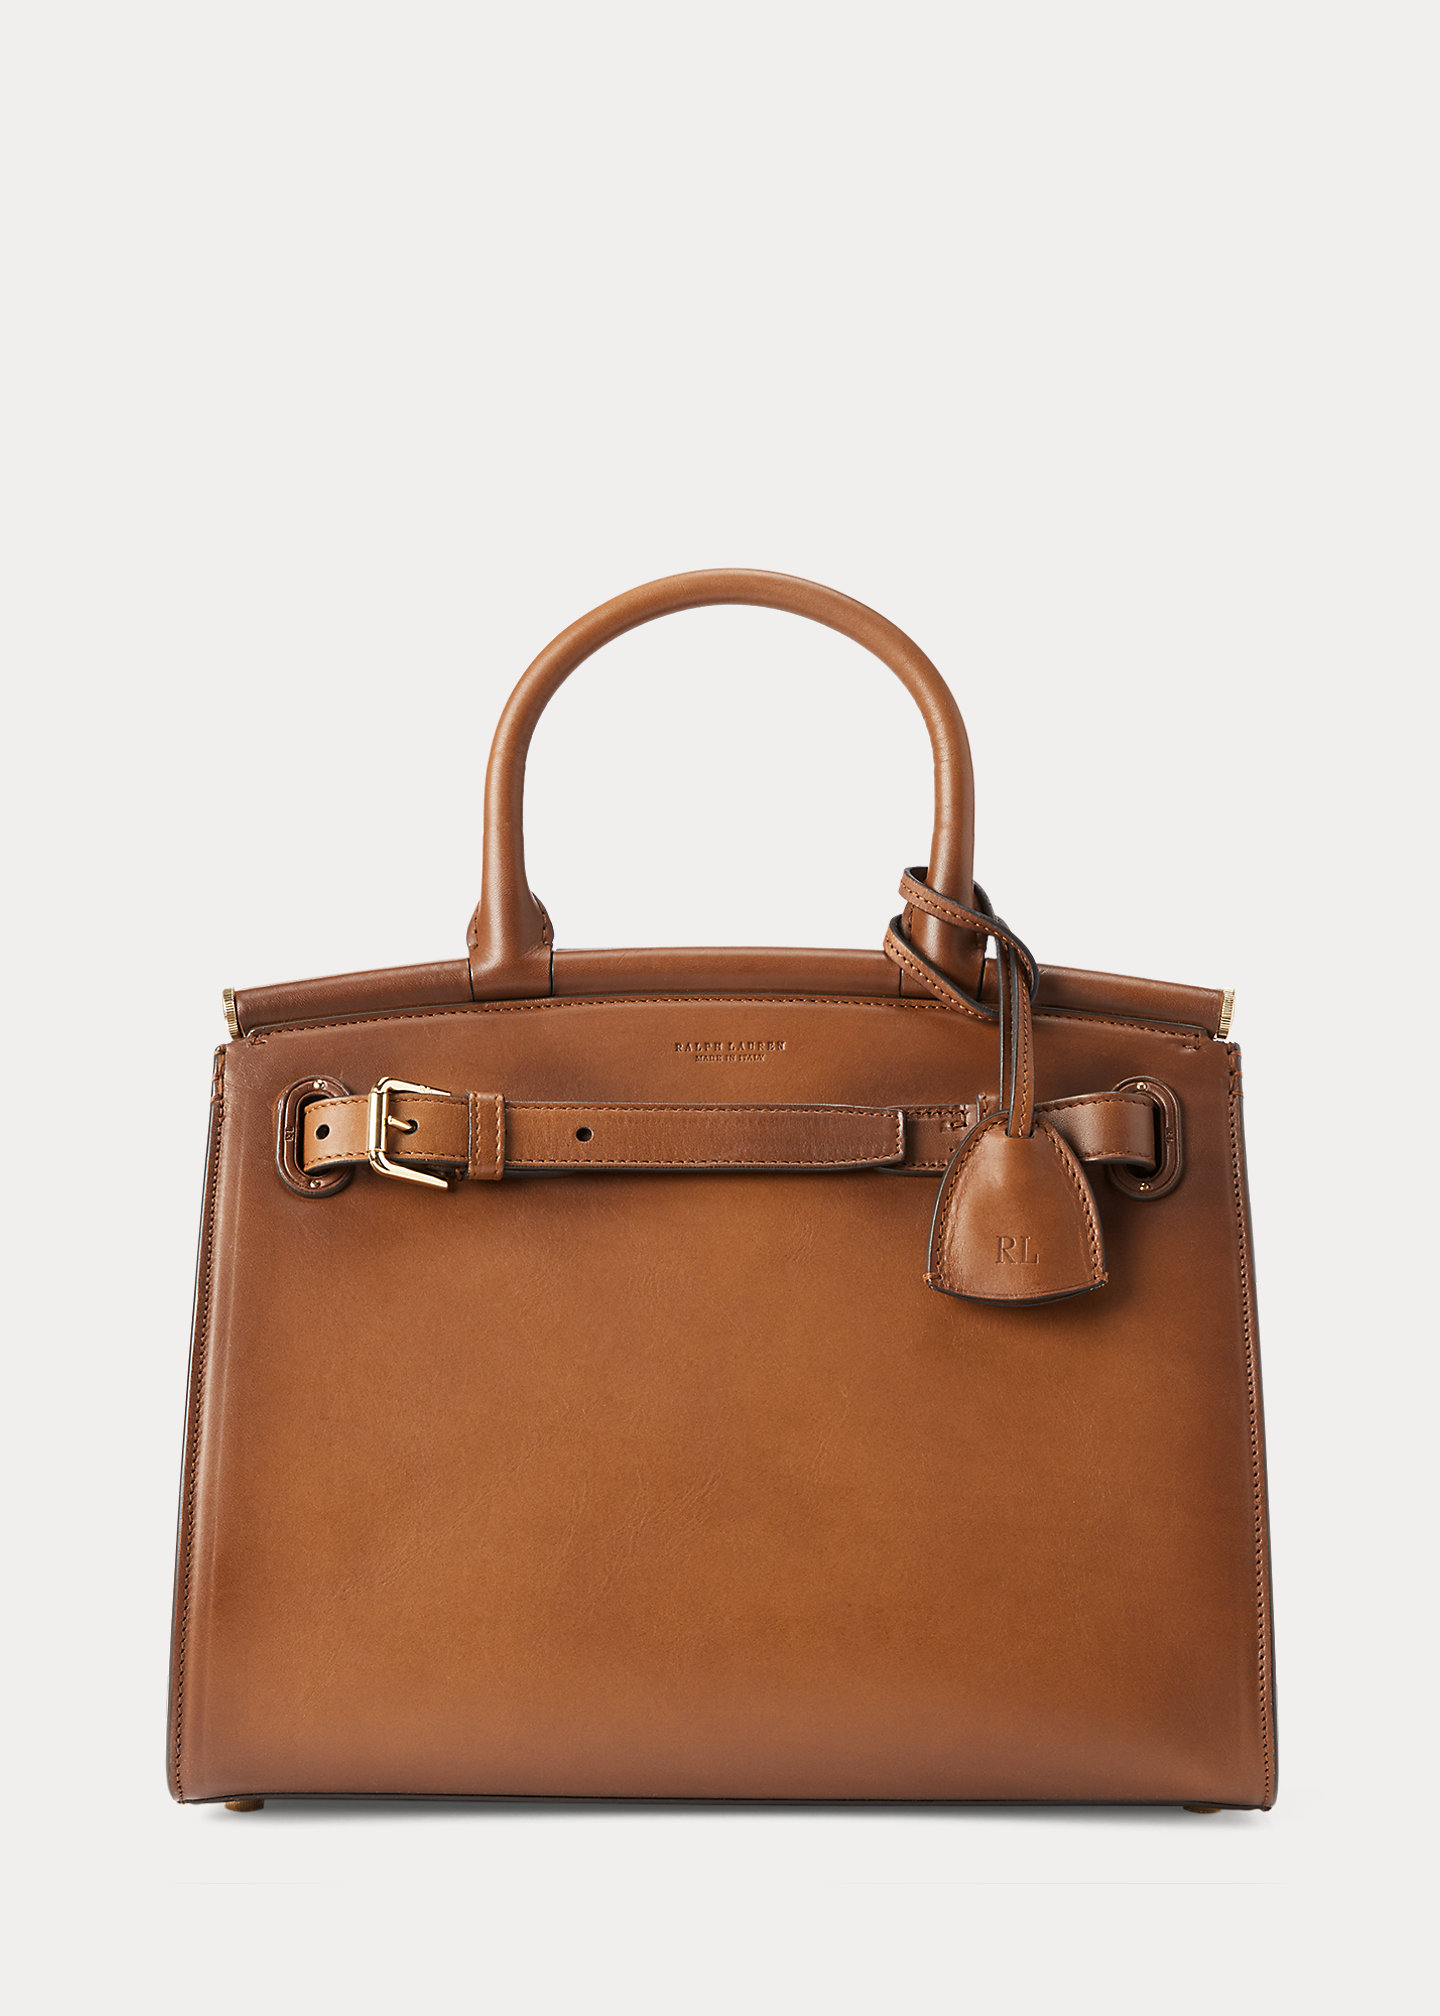 Top 8 Old Money Luxury Bags - luxfy